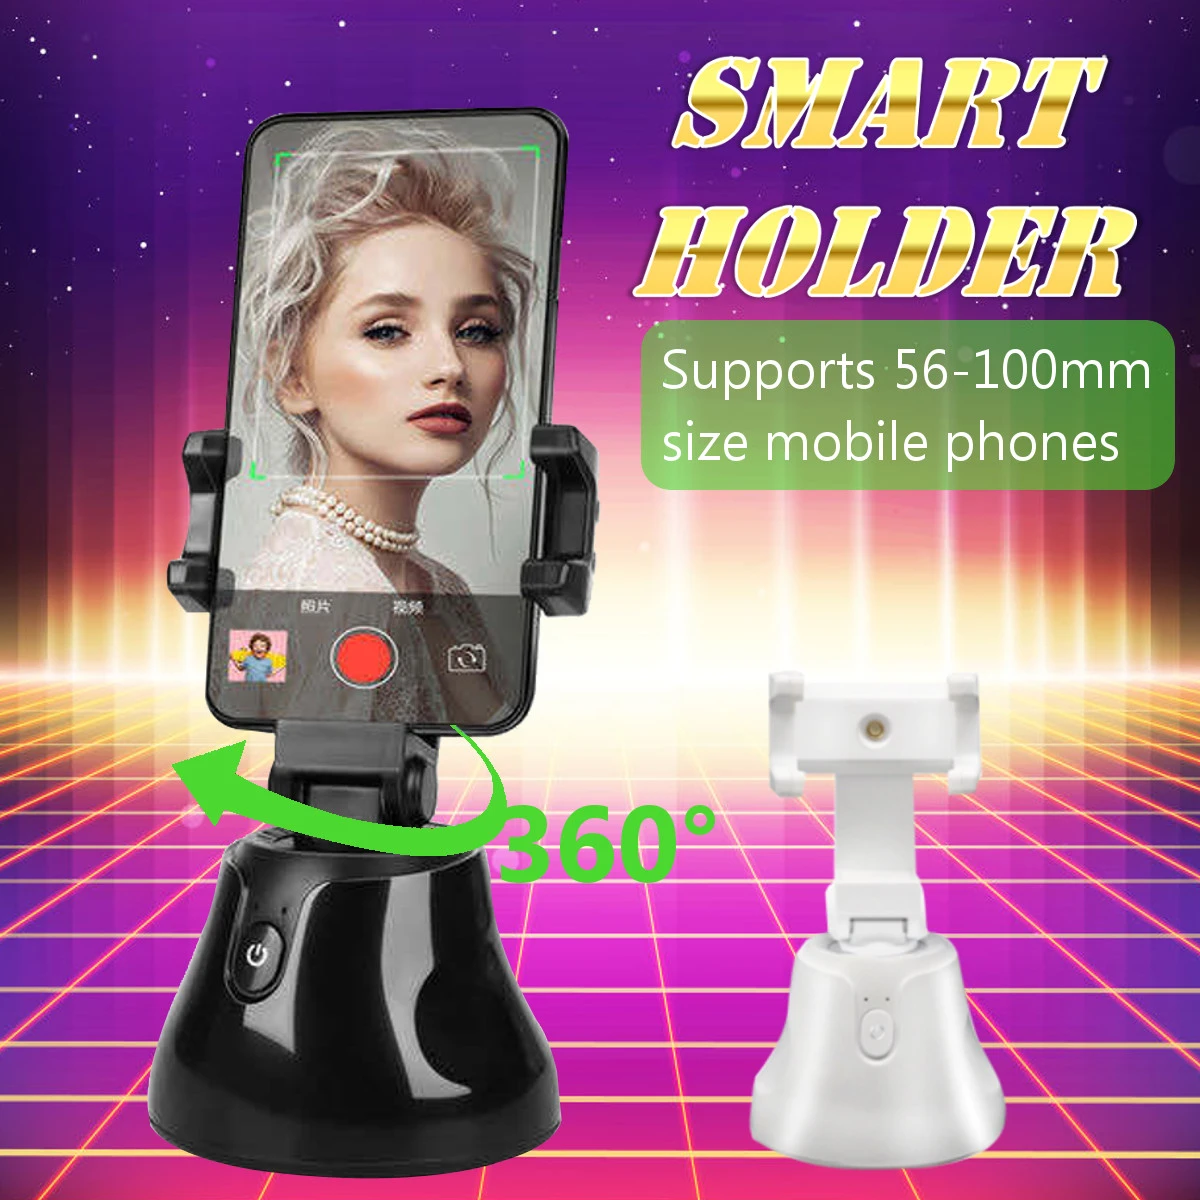 Smart Shooting Camera Phone Holder Auto Face Tracking Intelligent Gimbal Object Tracking Selfie Stick 360 Degree Rotation Phone Stabilizer